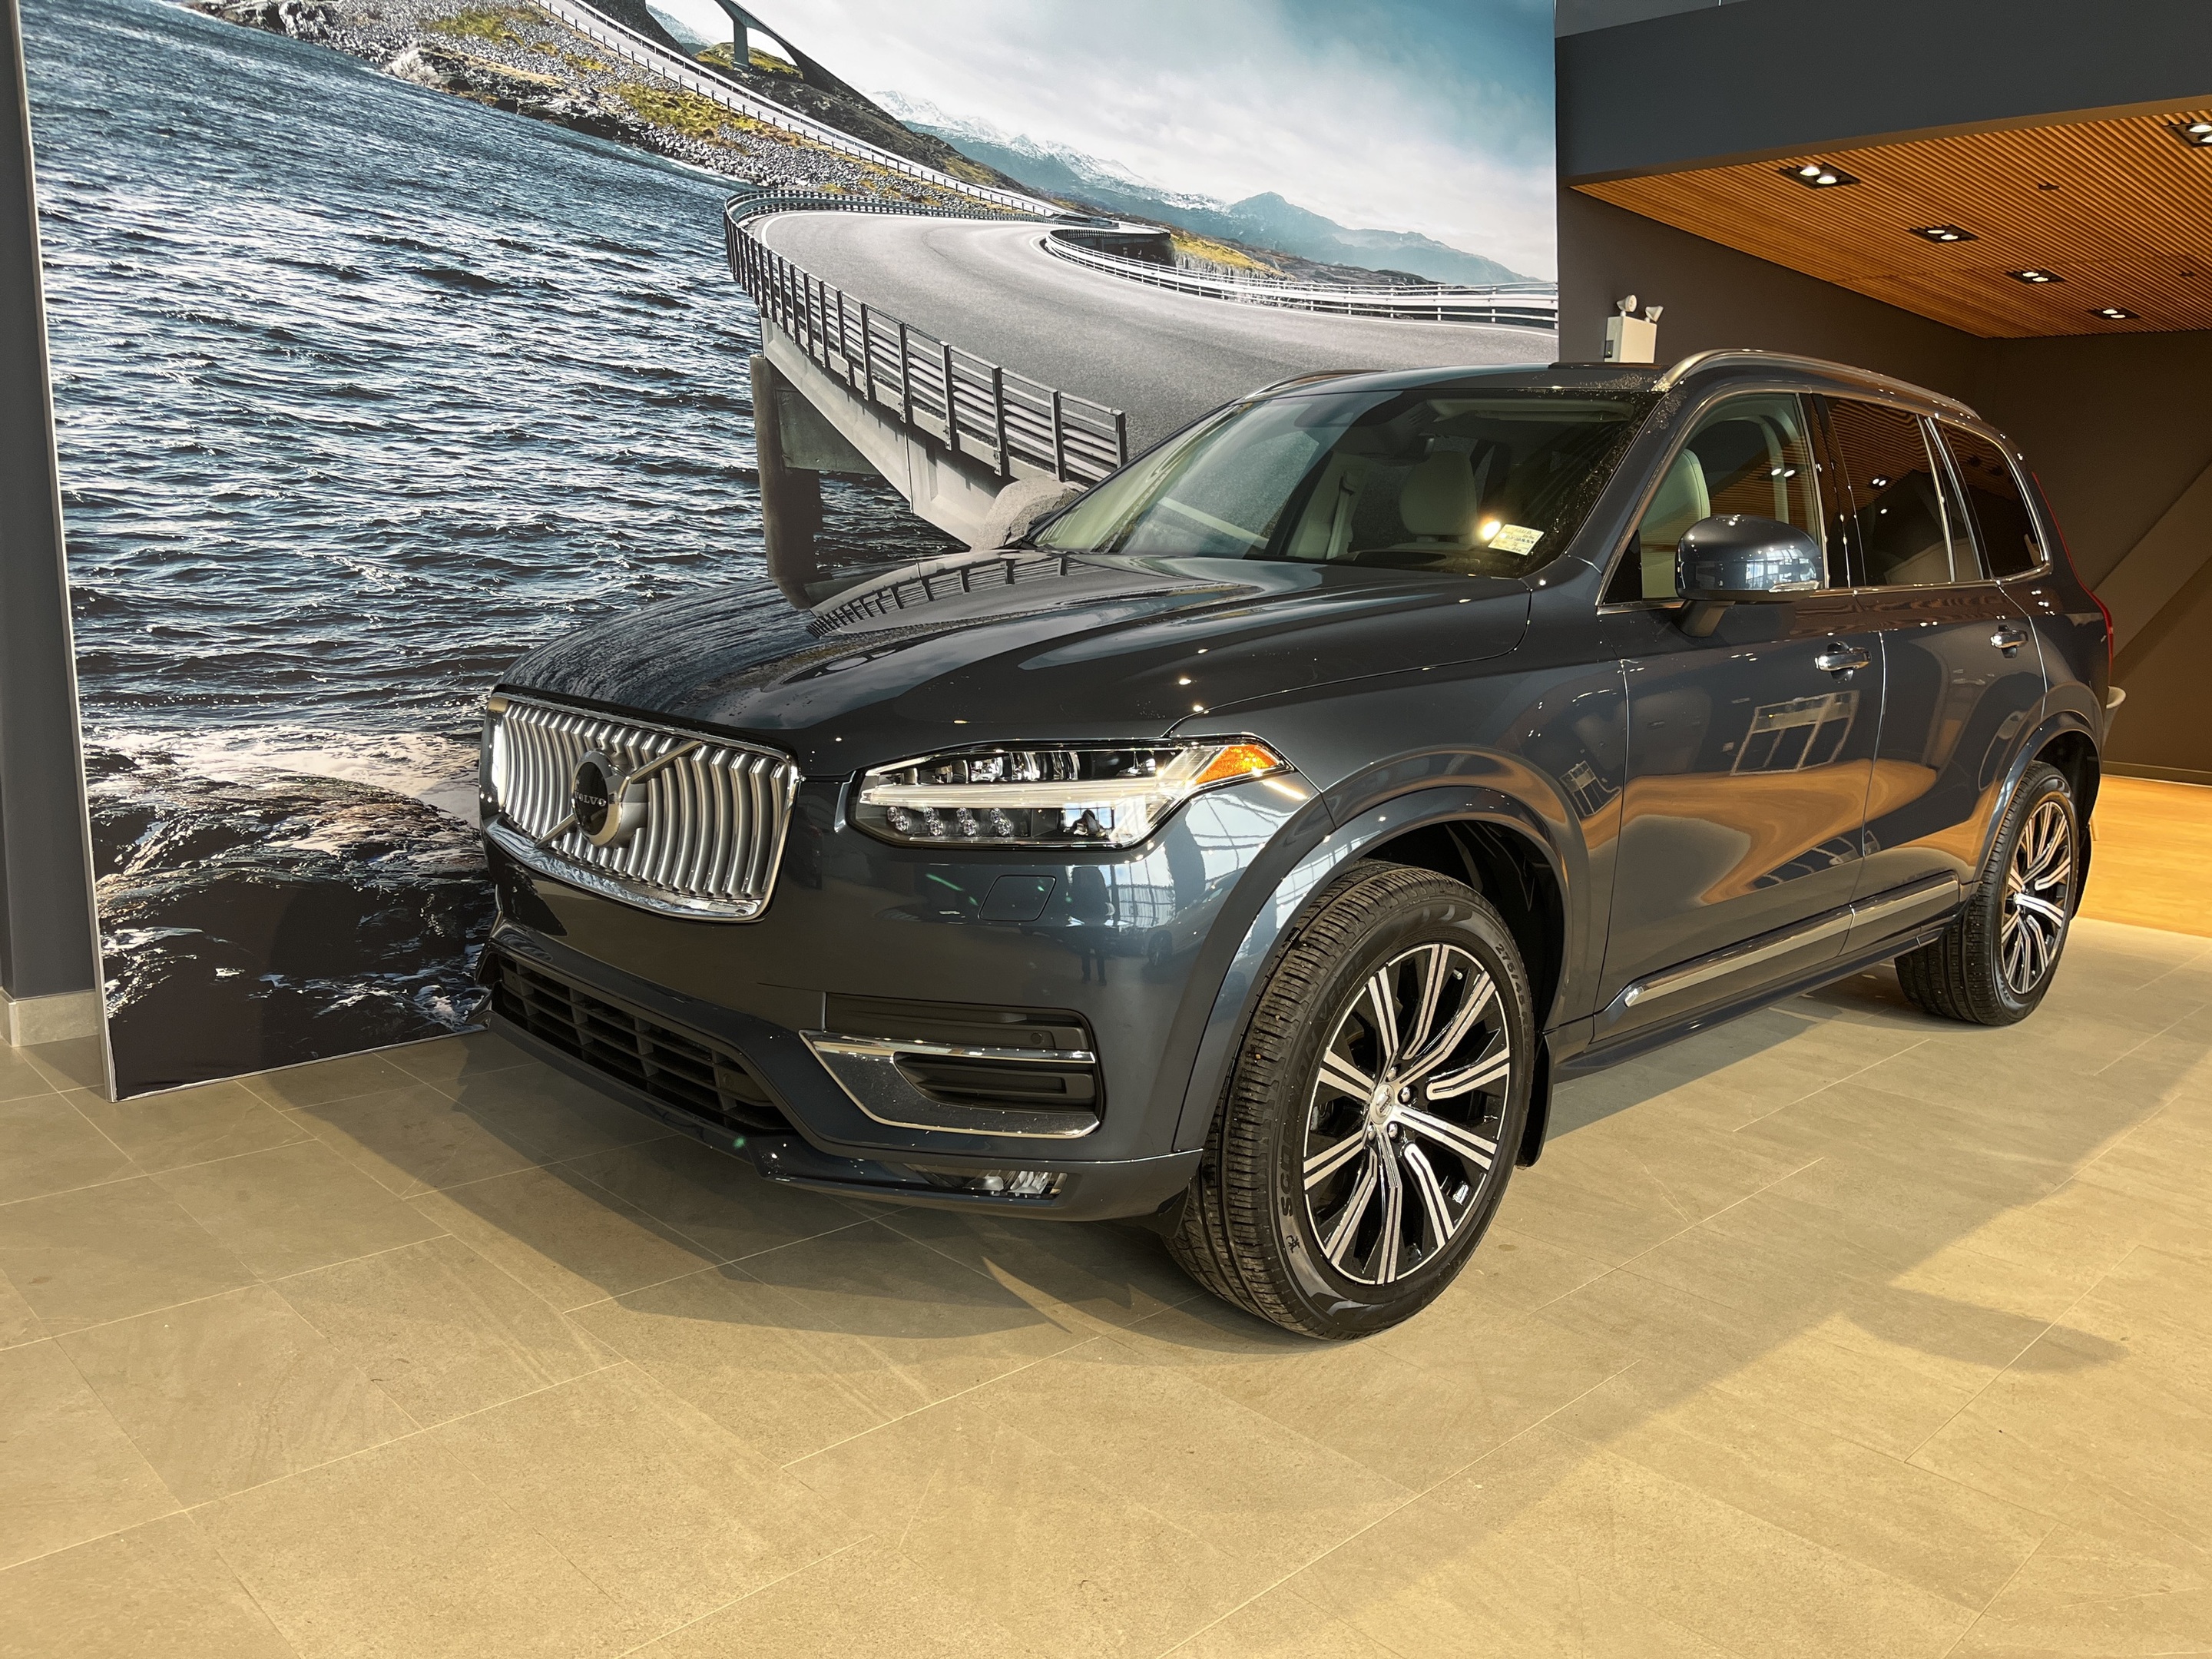 2021 Volvo XC90 T6 AWD Inscription (6-Seat) From 3.99%